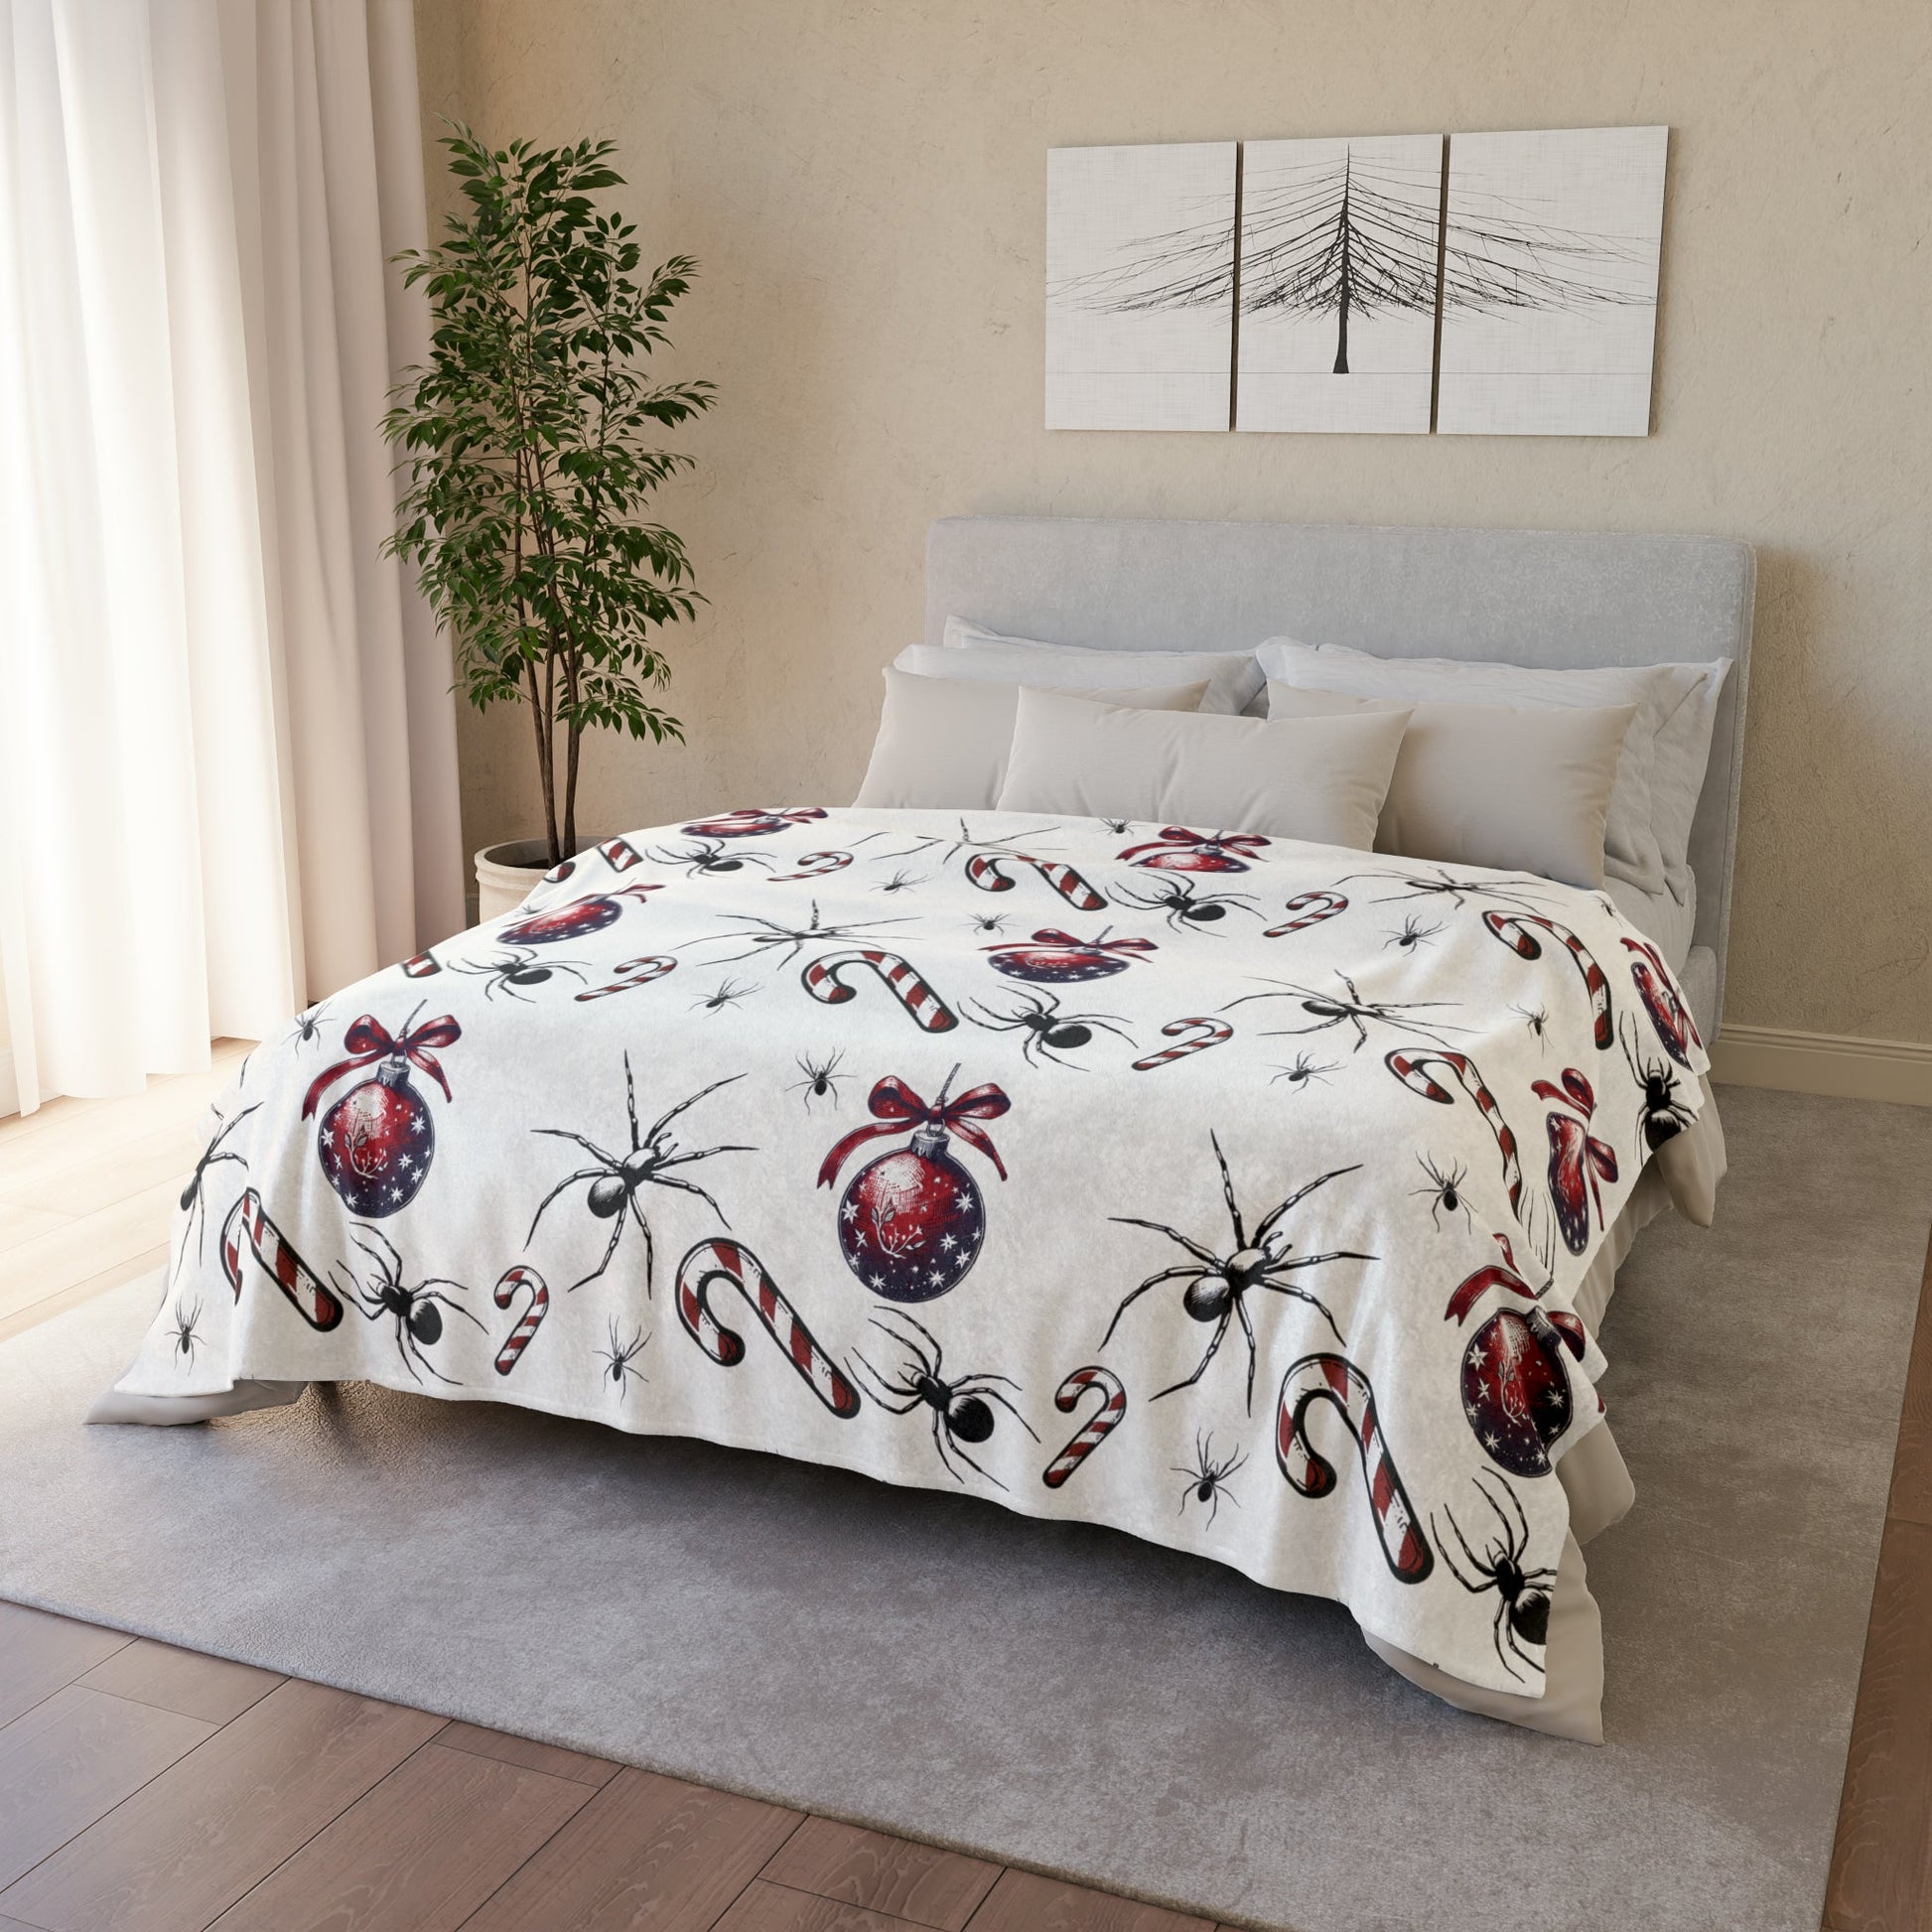 Spiders and Ornaments BlanketHome DecorVTZdesigns60" × 80"BedBeddingblanket